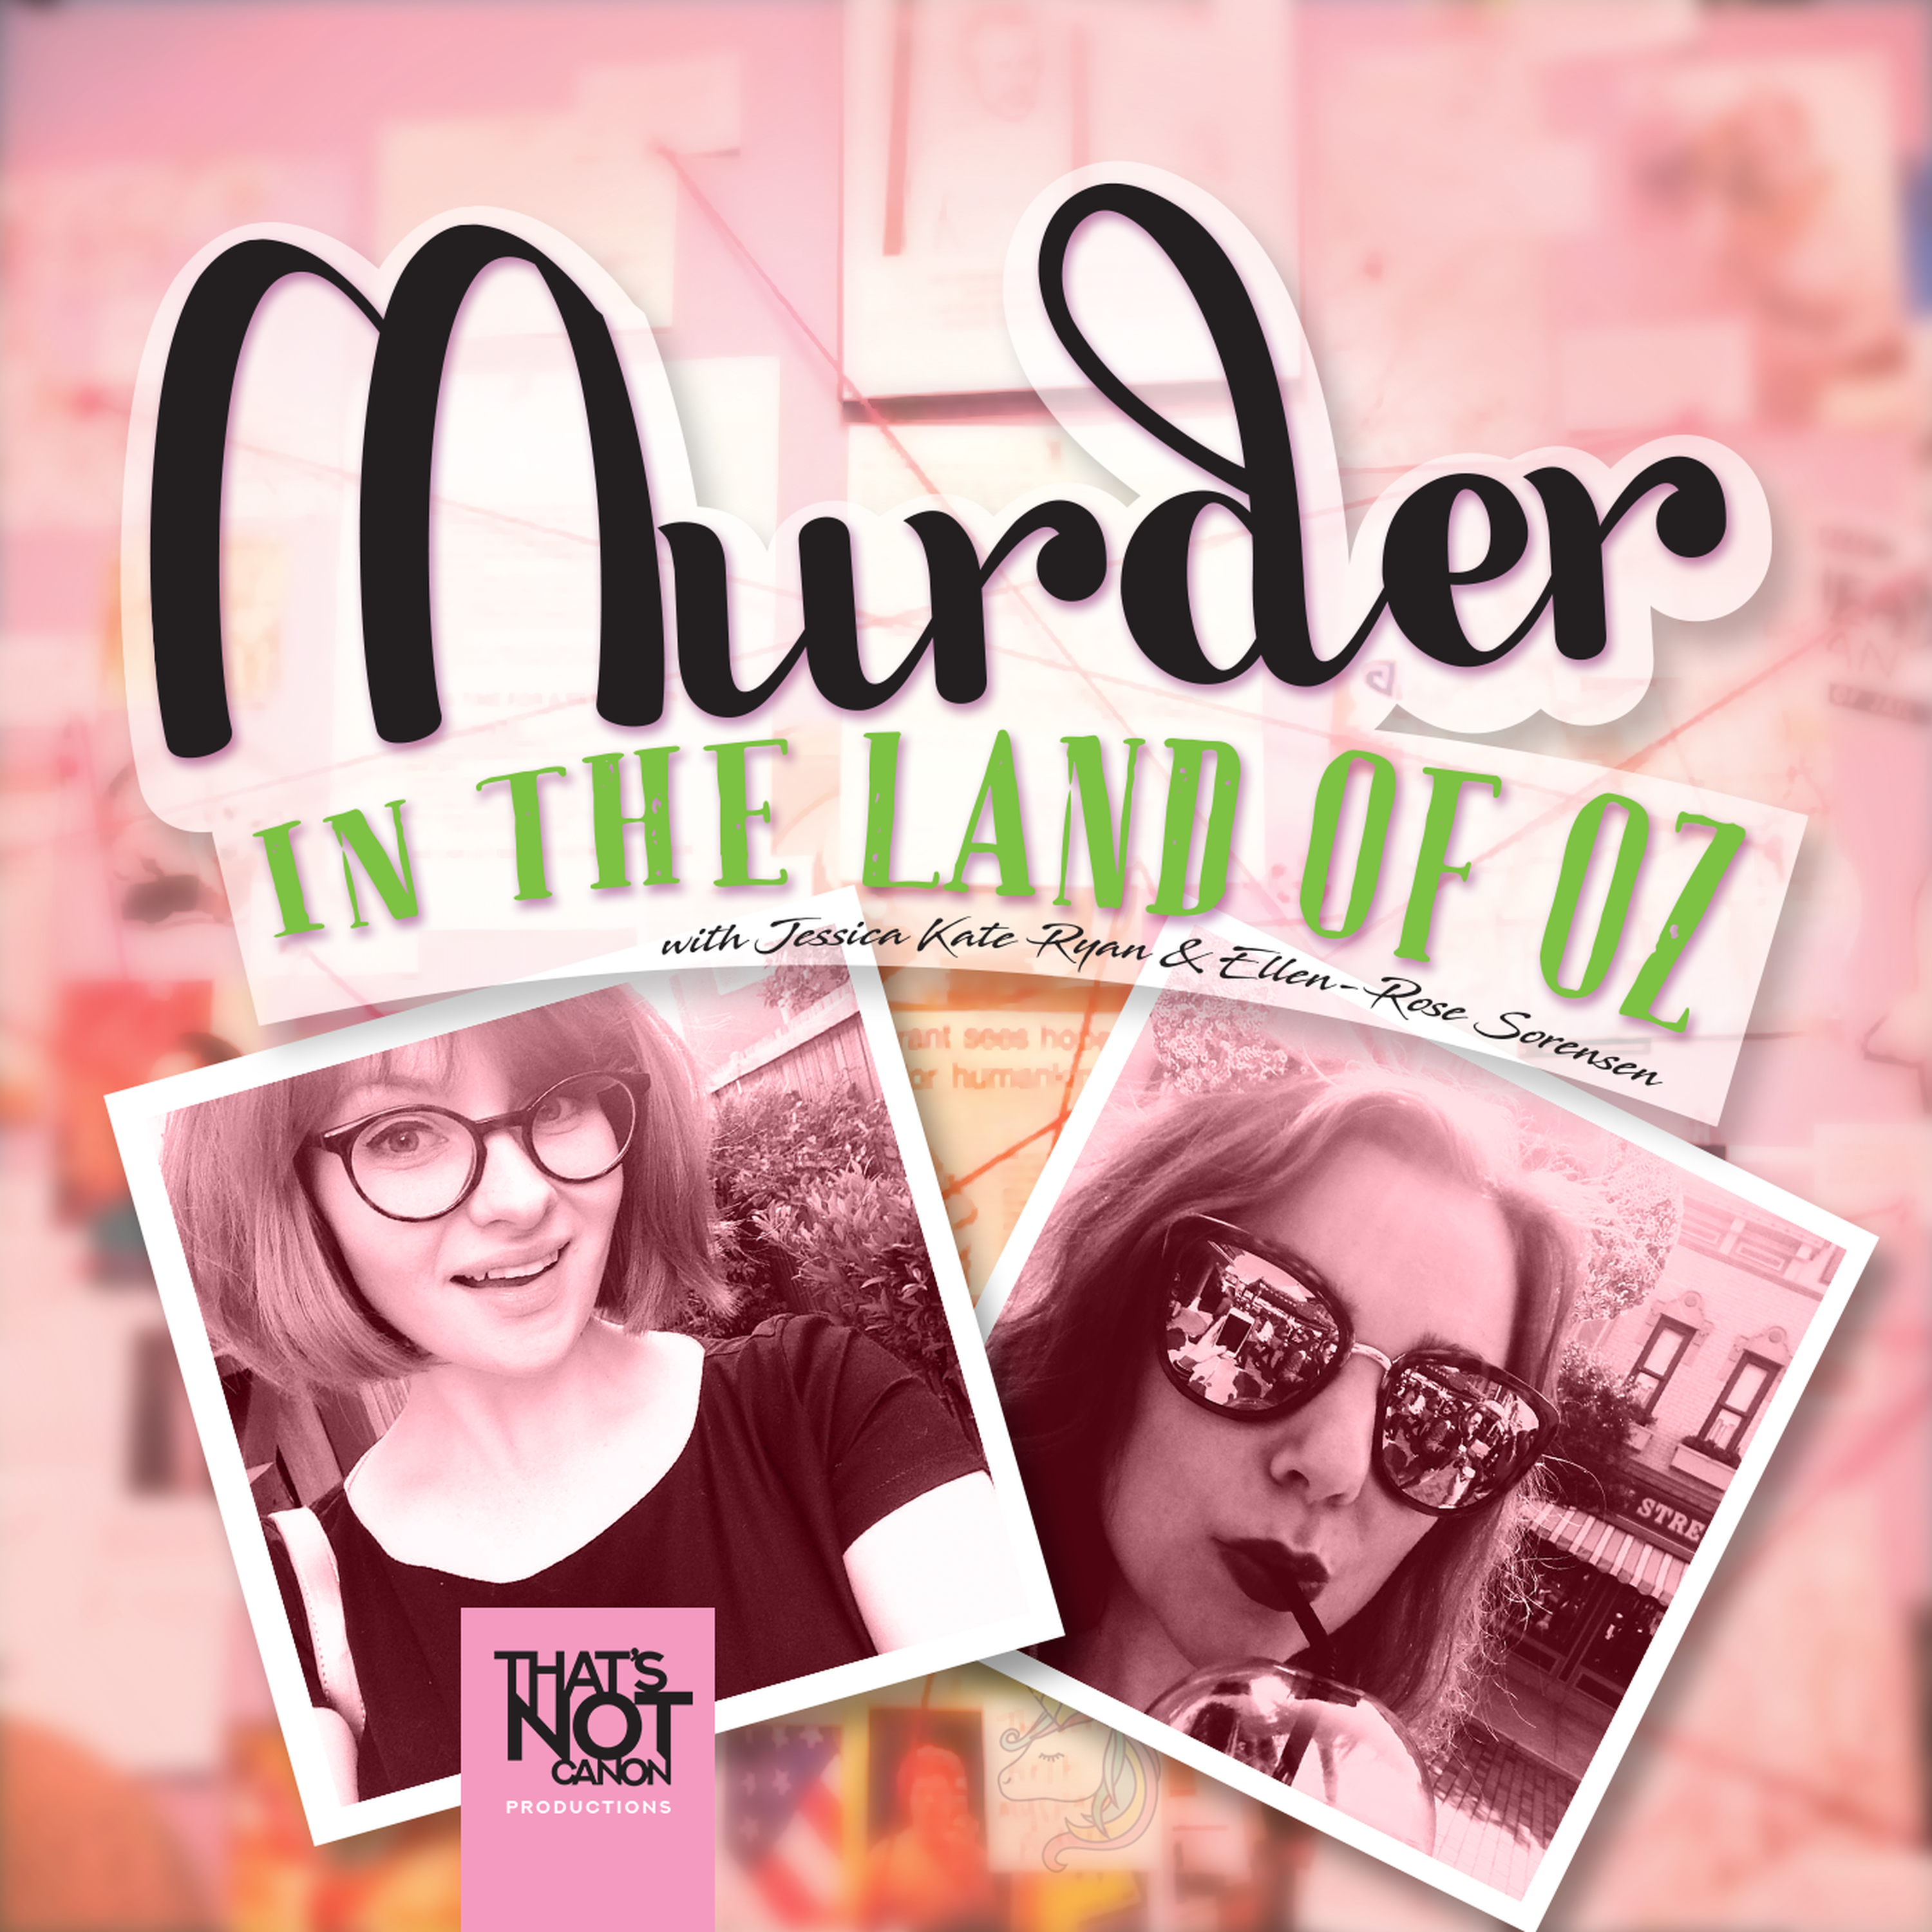 Murder in the Land of Oz - Coming Soon!